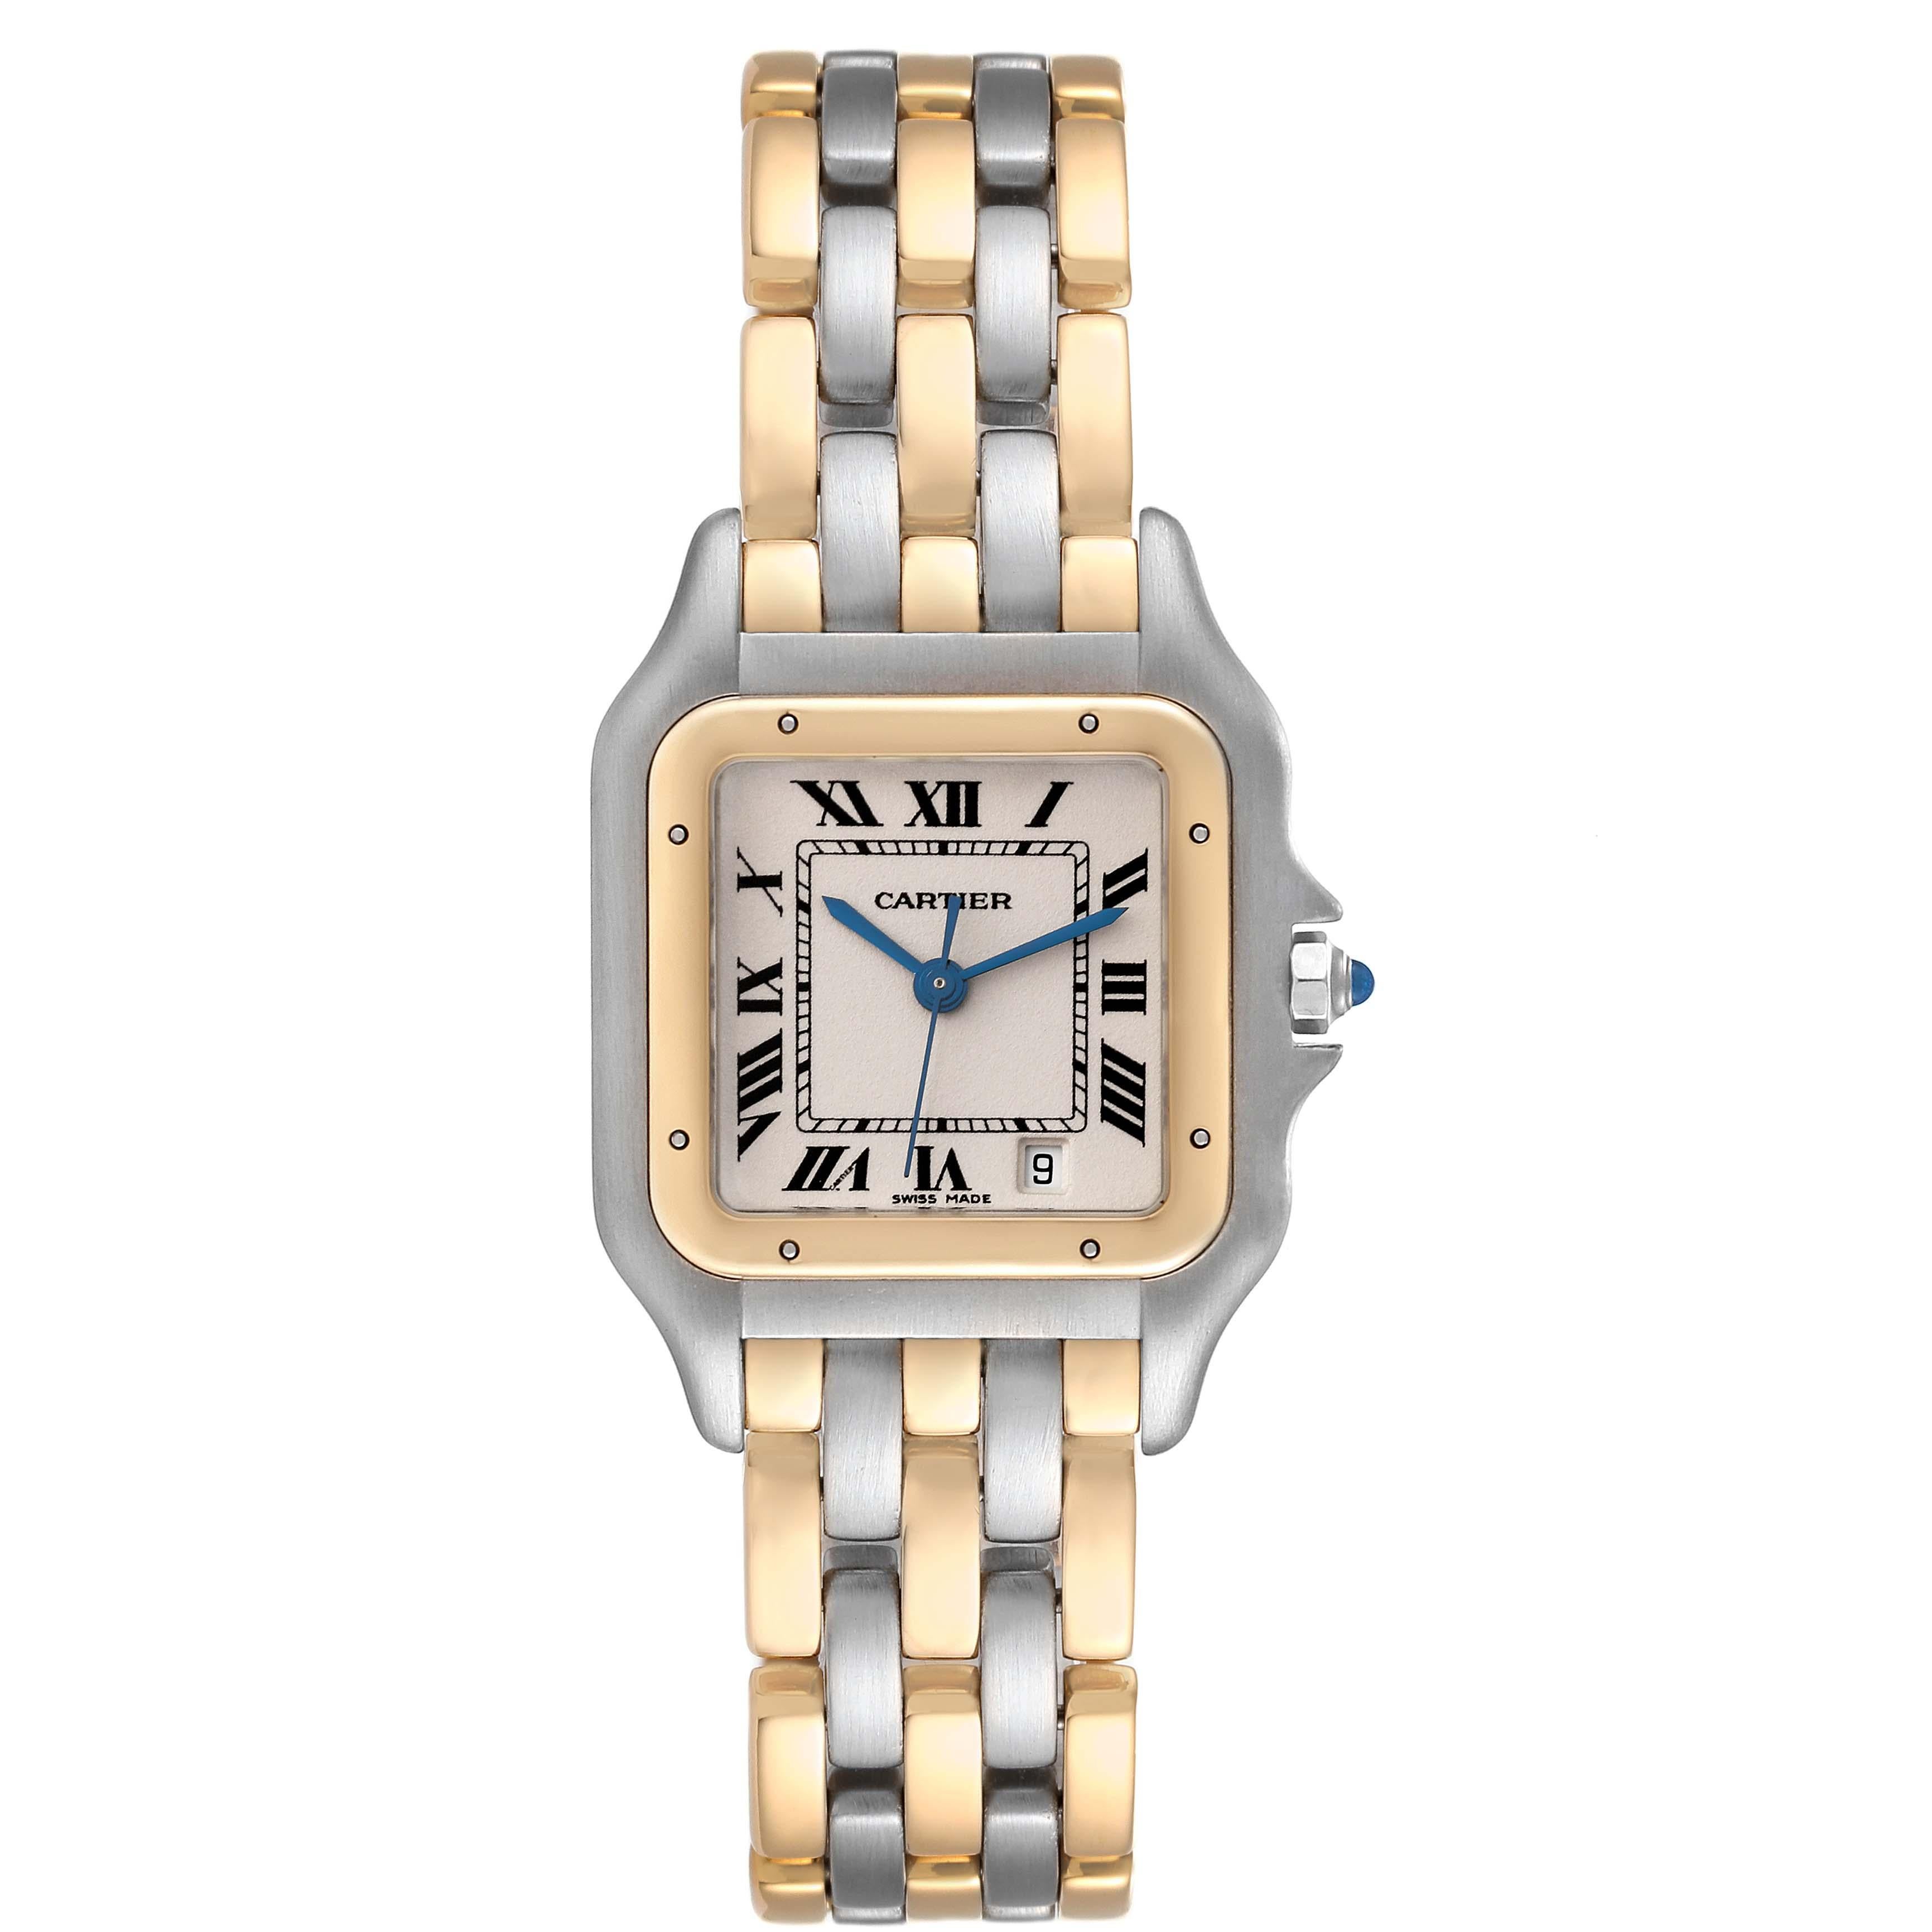 Cartier Panthere Midsize Steel Yellow Gold Three Row Ladies Watch 83083244 Box Papers. Quartz movement. Stainless steel and 18k yellow gold case 26.0 x 36.0 mm. Octagonal crown set with the blue spinel cabochon. . Scratch resistant sapphire crystal.